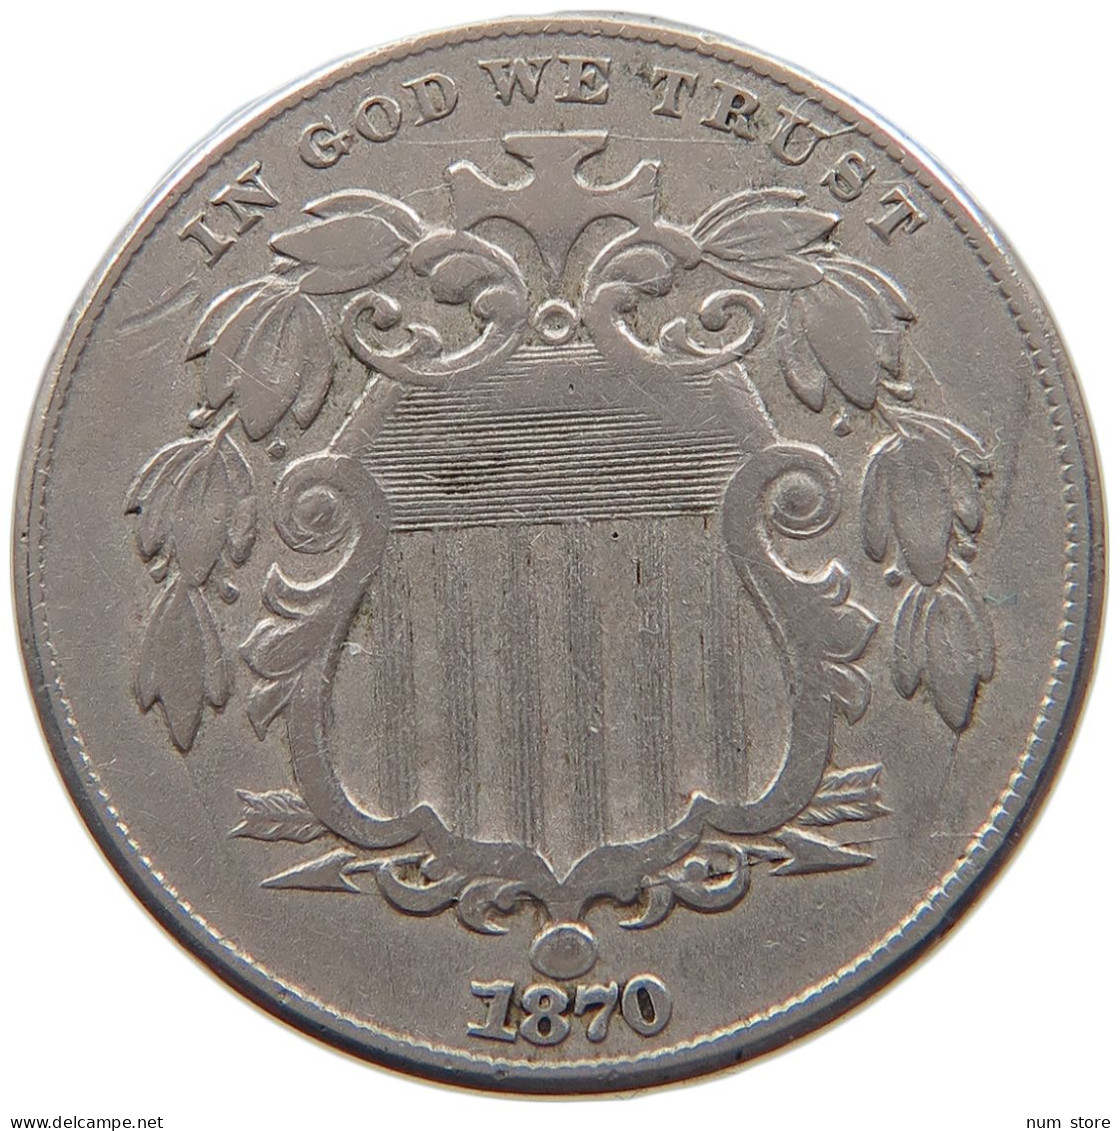 UNITED STATES OF AMERICA NICKEL 1870  #t024 0241 - 1866-83: Shield (Écusson)